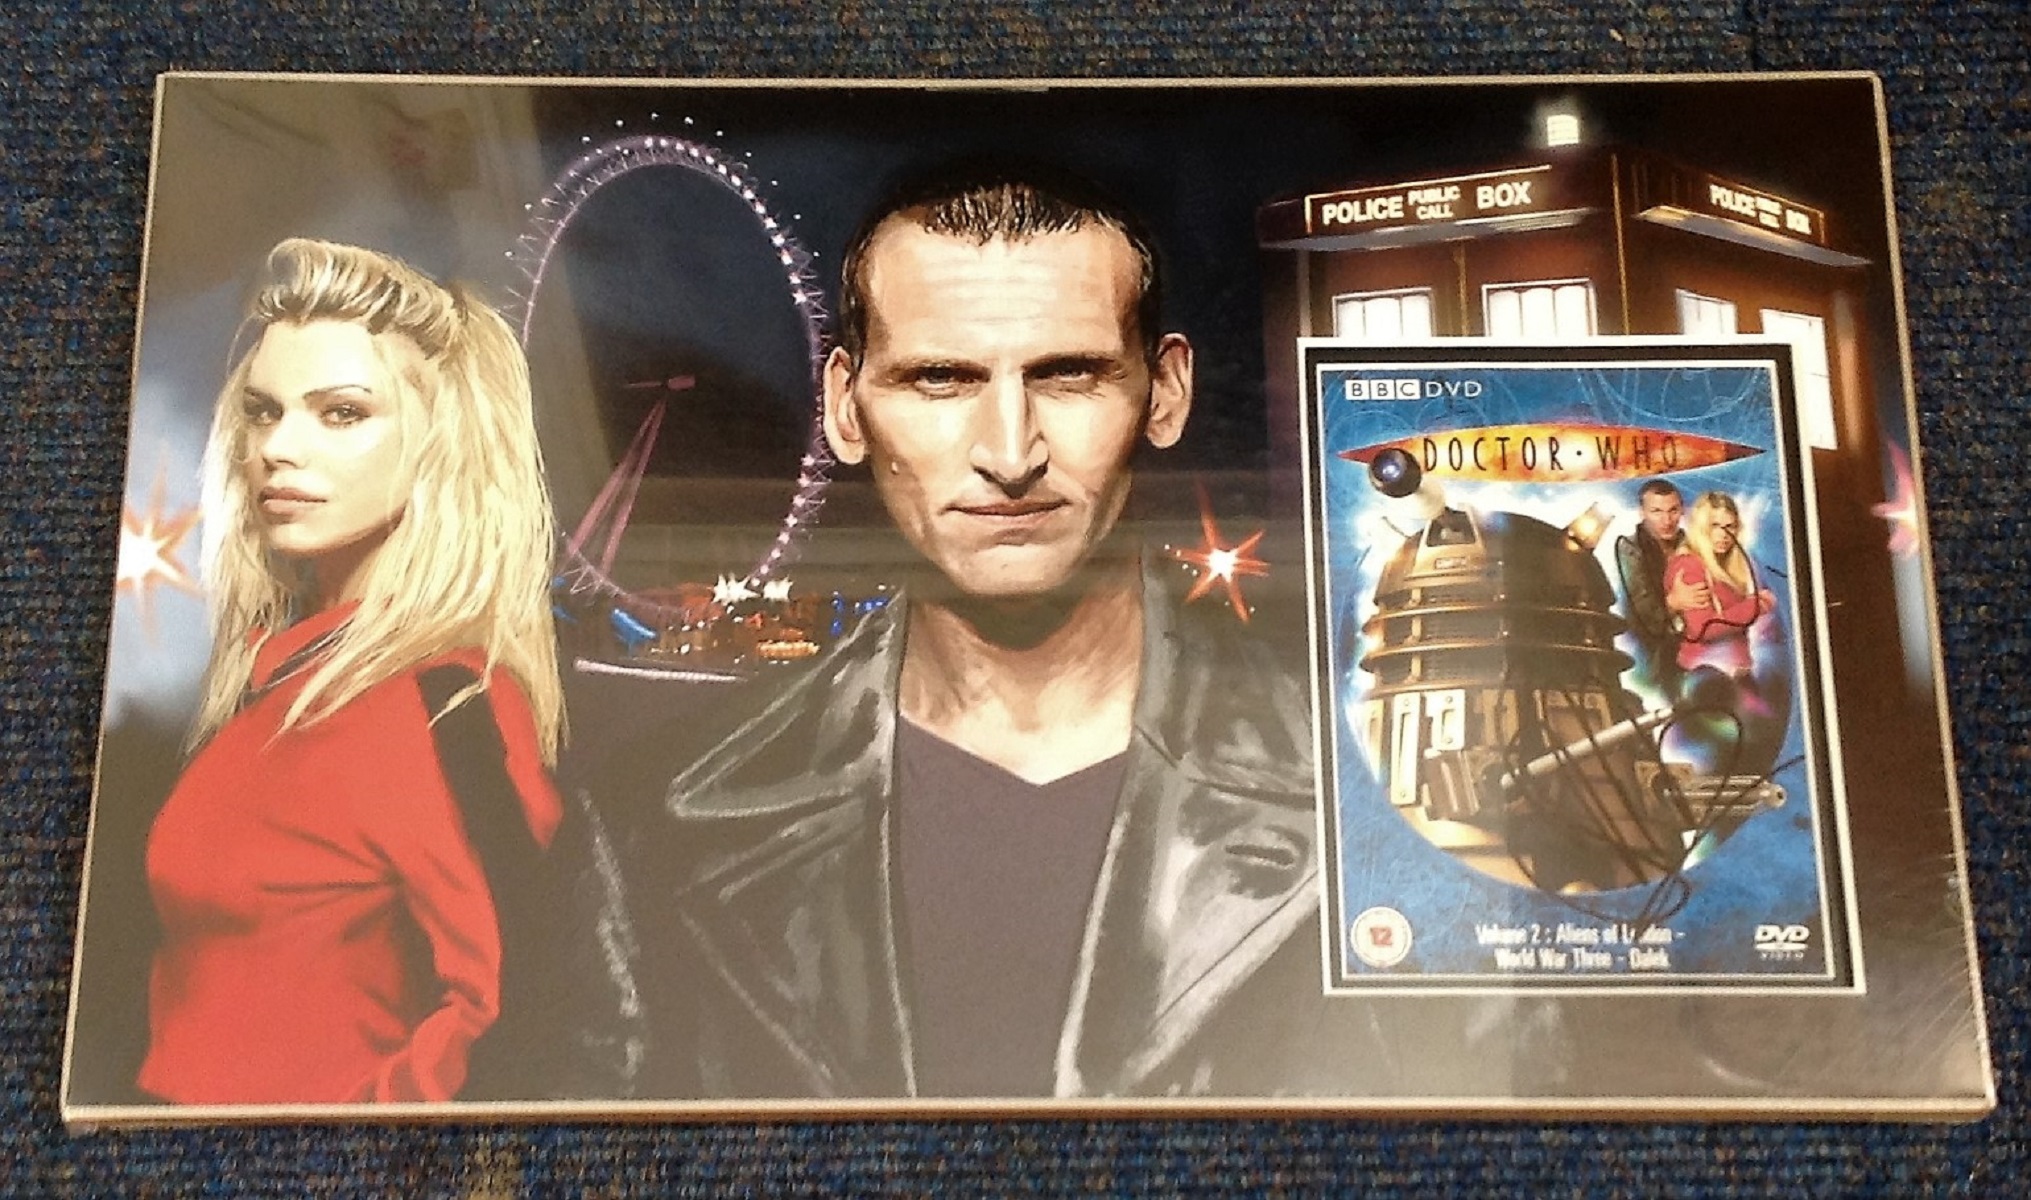 Billie Piper Christopher Eccleston signed Dr Who DVD sleeve mounted